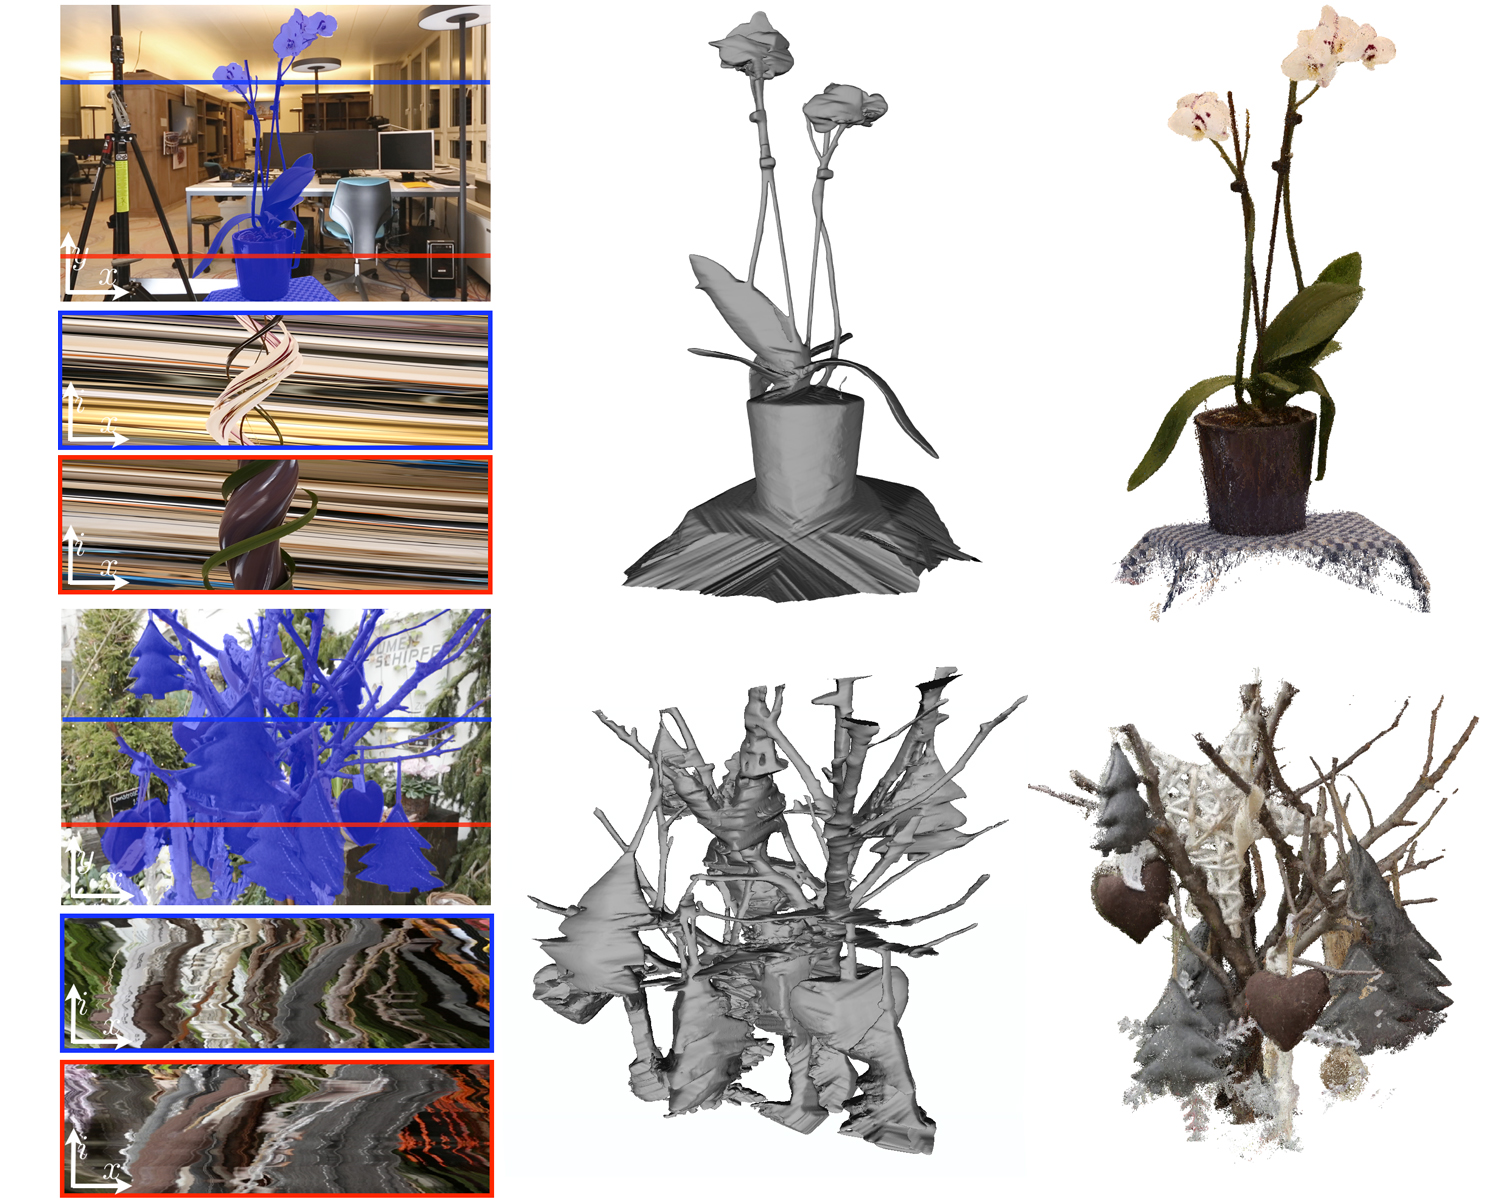 Efficient 3D Object Segmentation from Densely Sampled Light Fields with Applications to 3D Reconstruction-Image